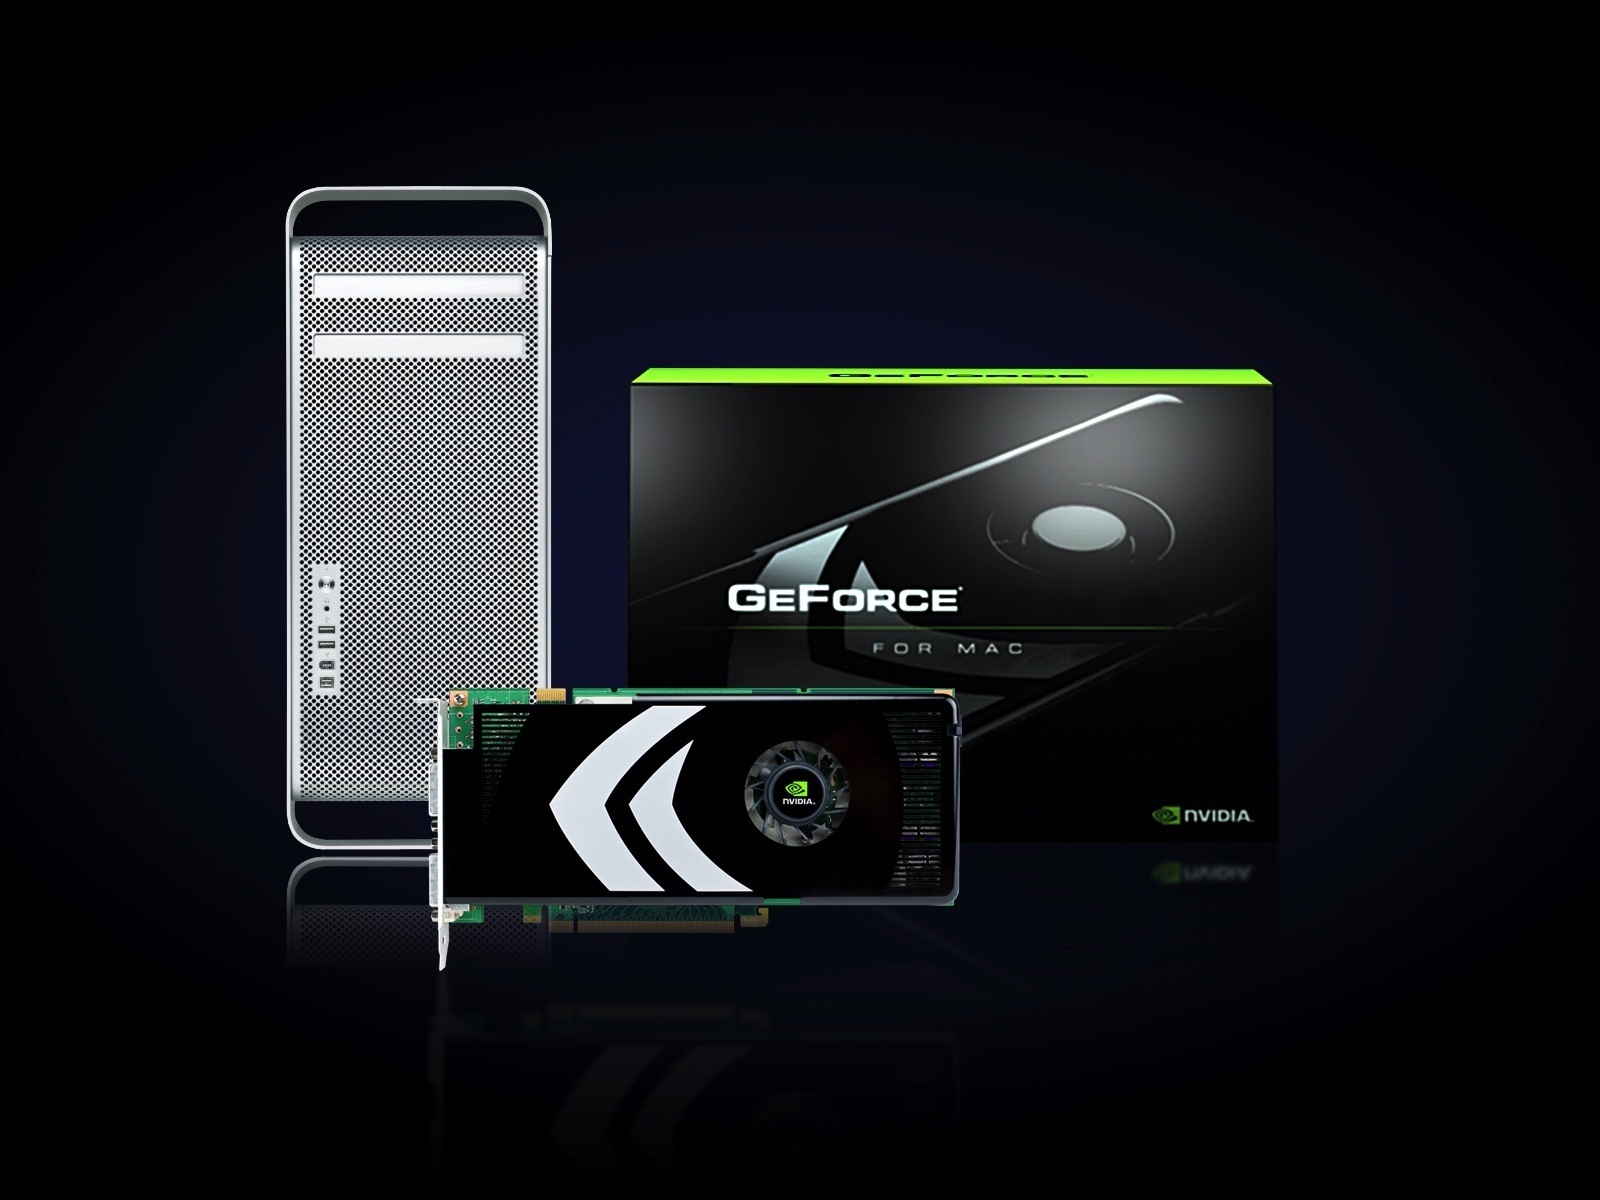 mac driver for geforce 750 m